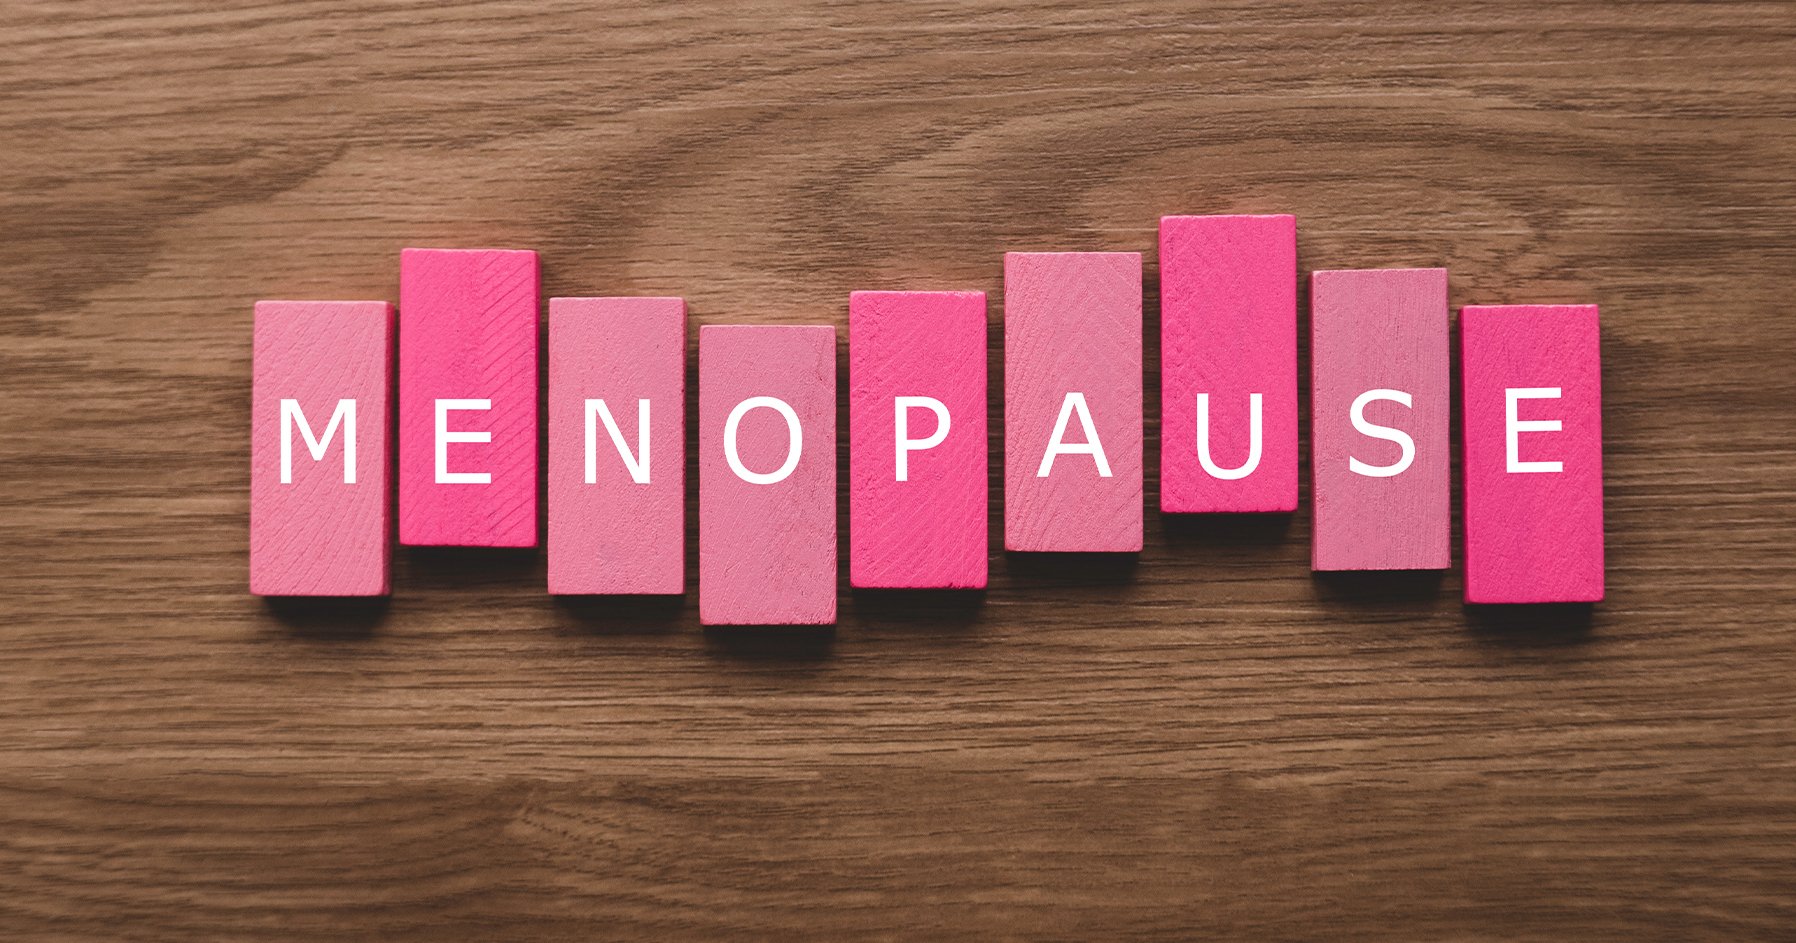 Menopause or pregnant: What are the signs?